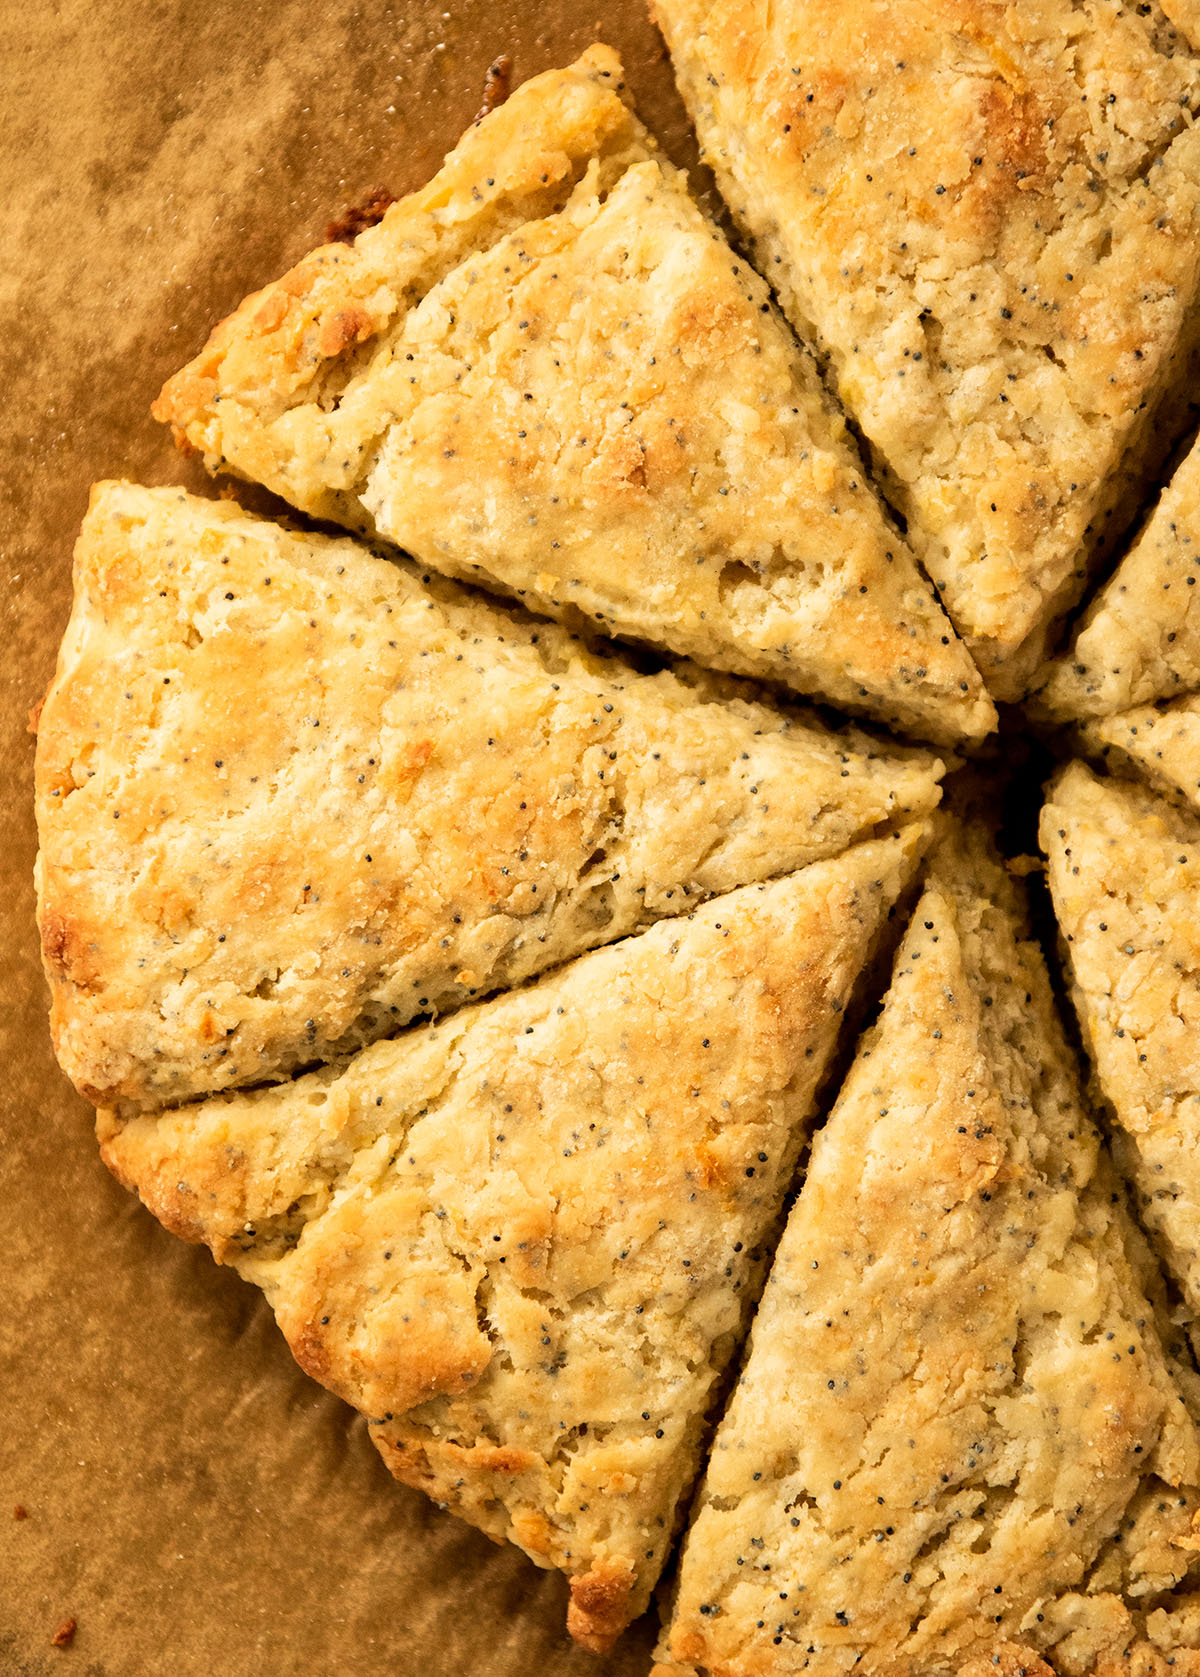 Overhead view of lemon scones on a piece of brown parchment paper.